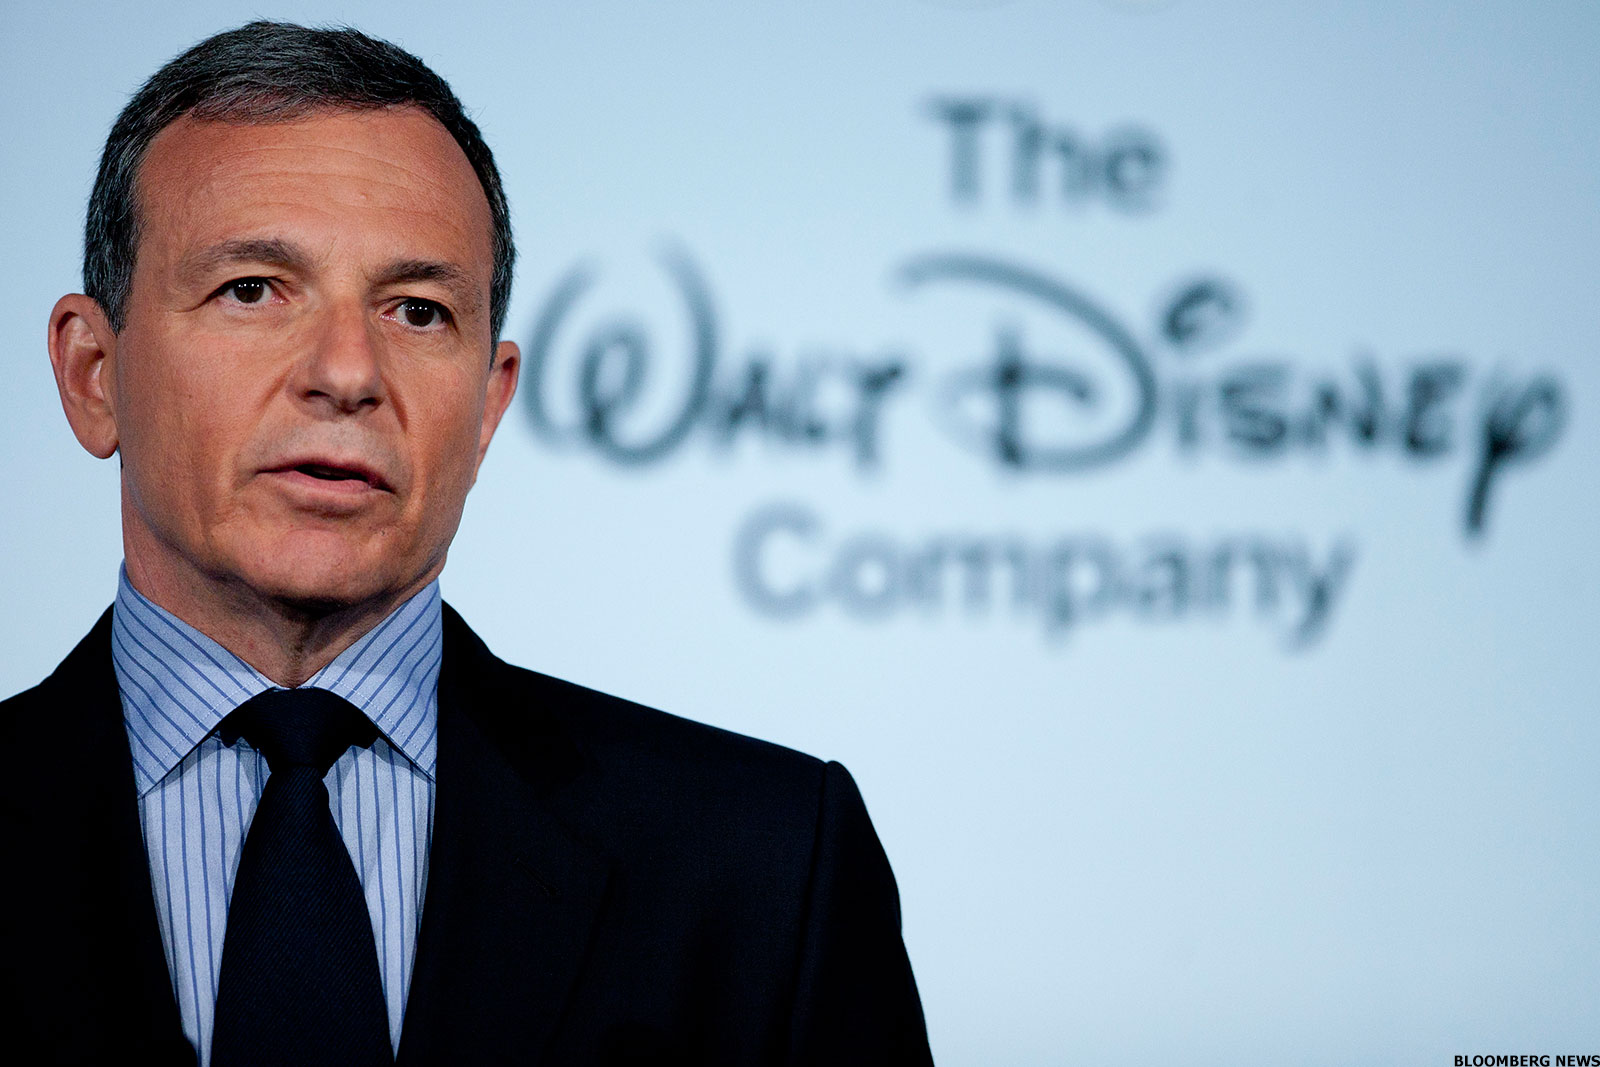 The Walt Disney Company Offers Concessions to European Commission For Fox Merger Approval